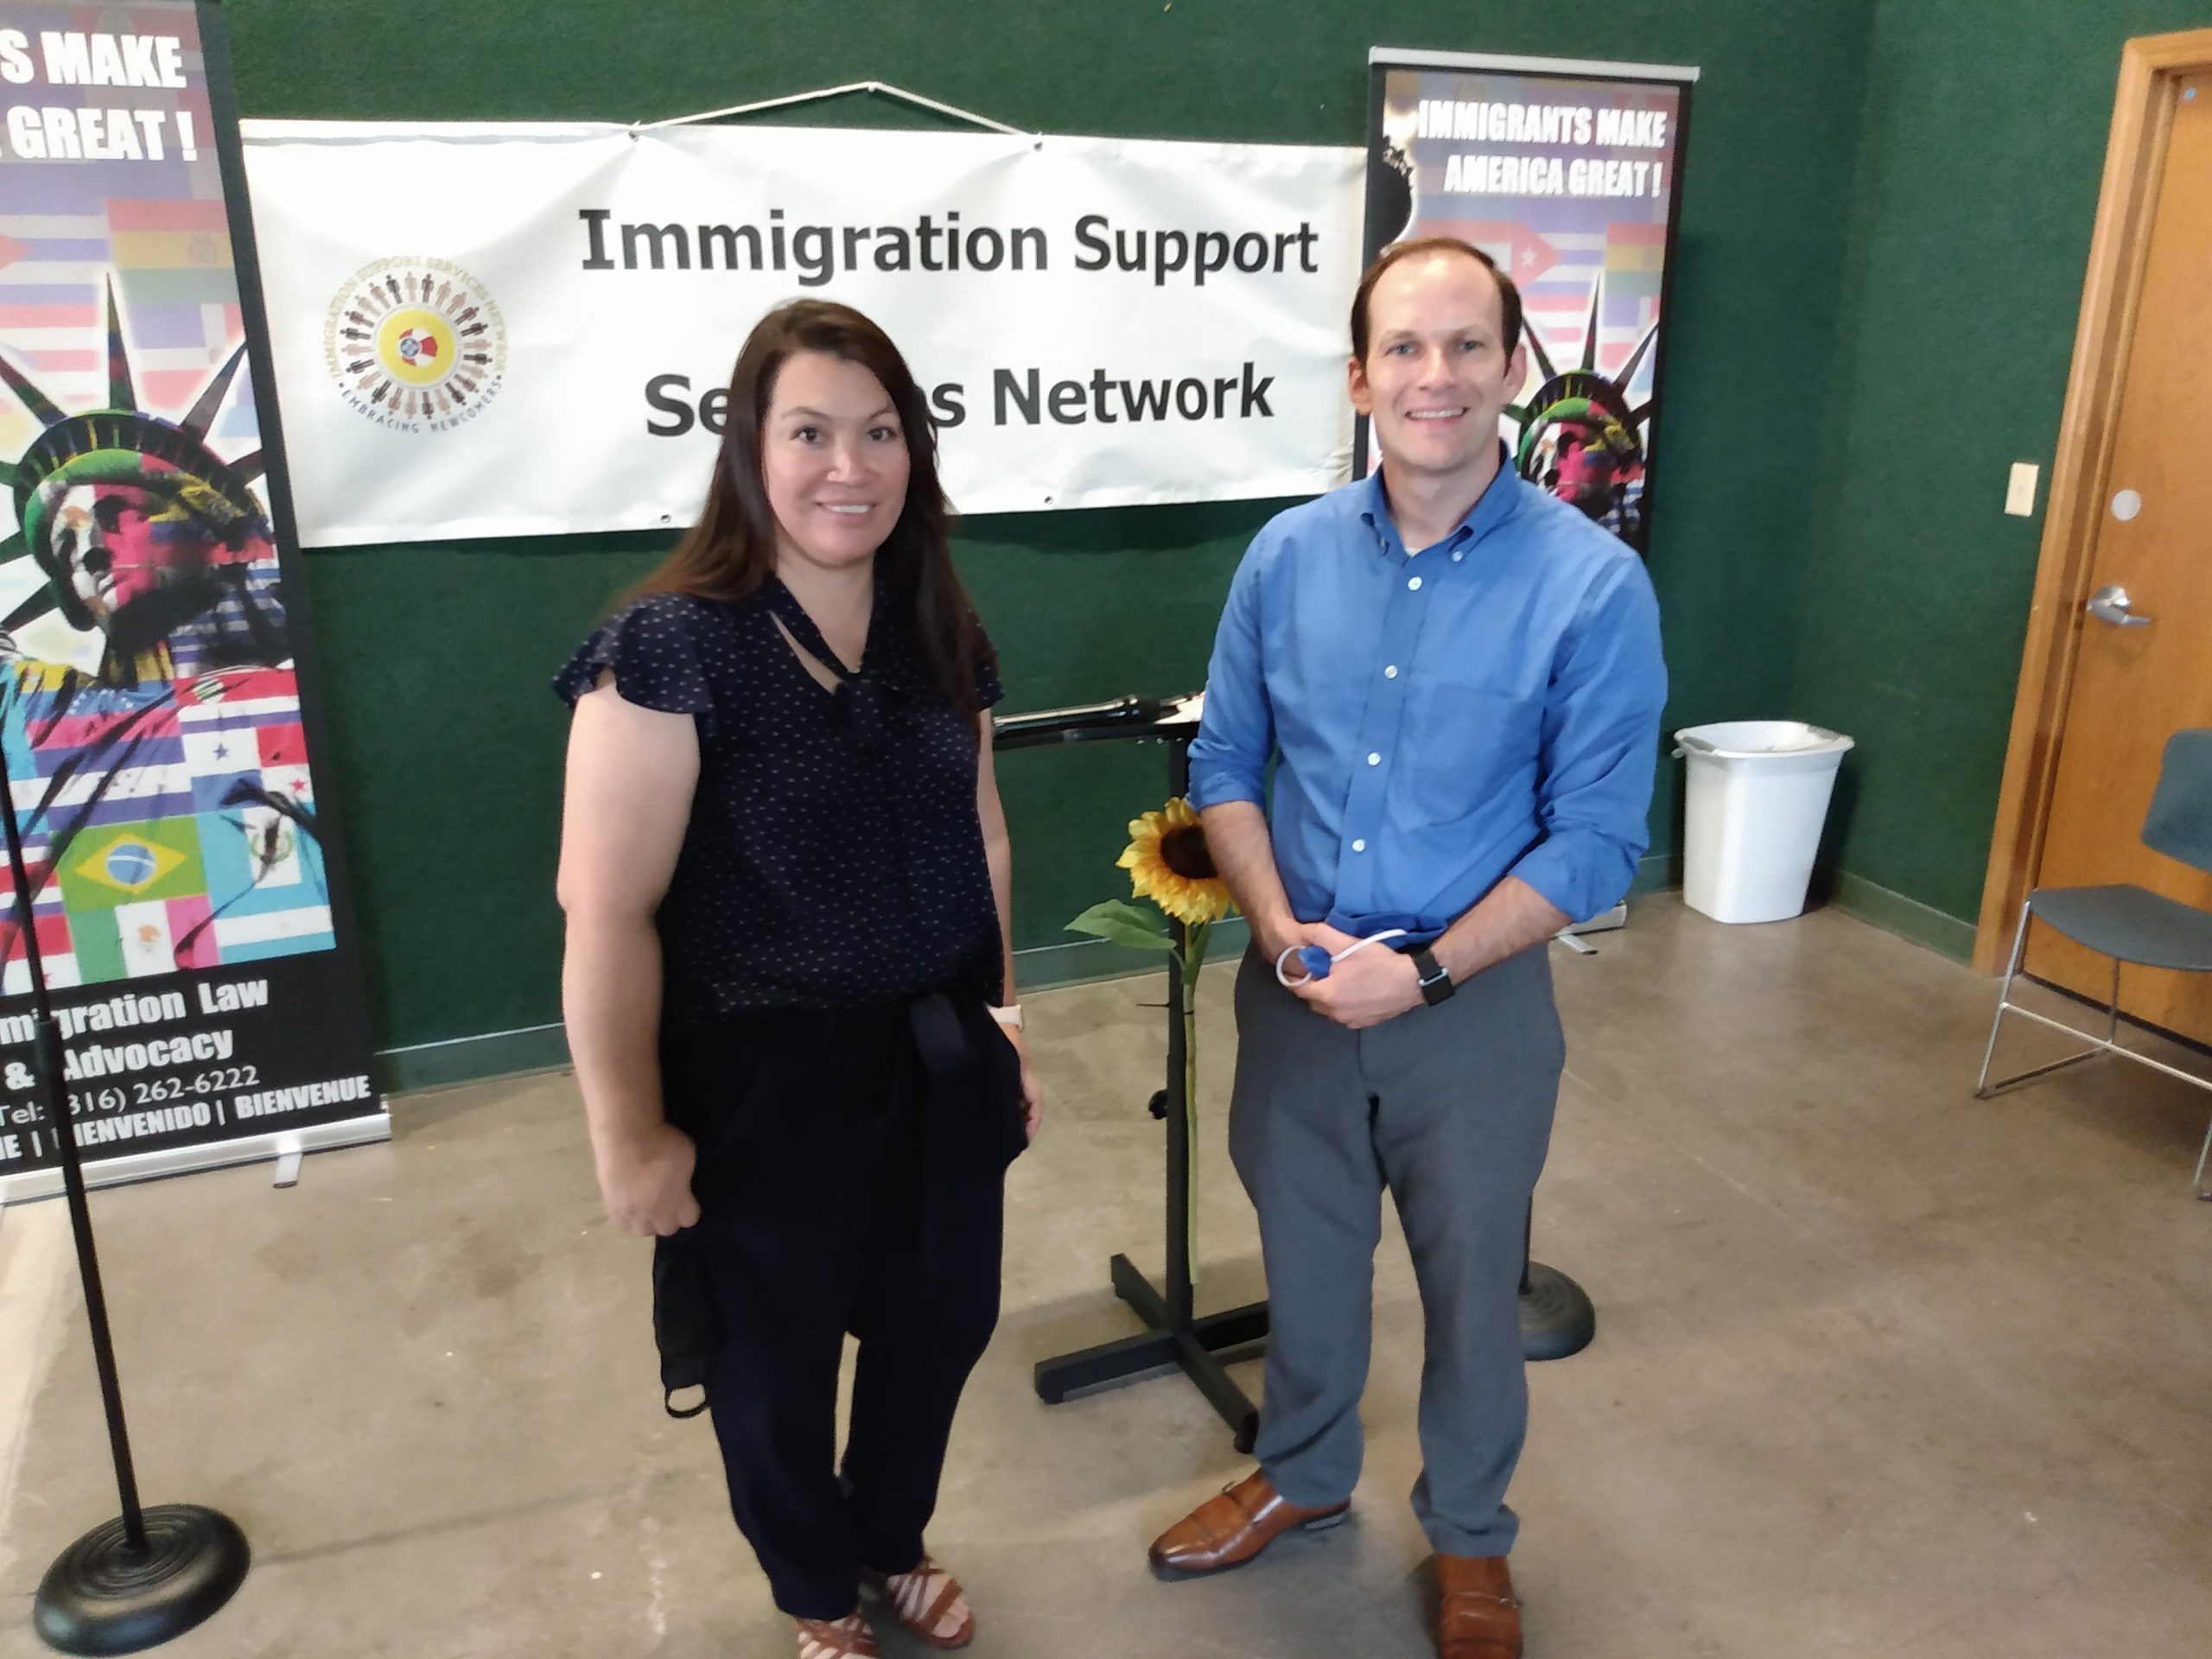 Two individuals stand in front of a banner that reads "Immigration Support Services Network." The woman on the left is wearing a dark blouse and pants, while the man on the right is dressed in a blue shirt and gray pants. A small table with a sunflower is nearby.